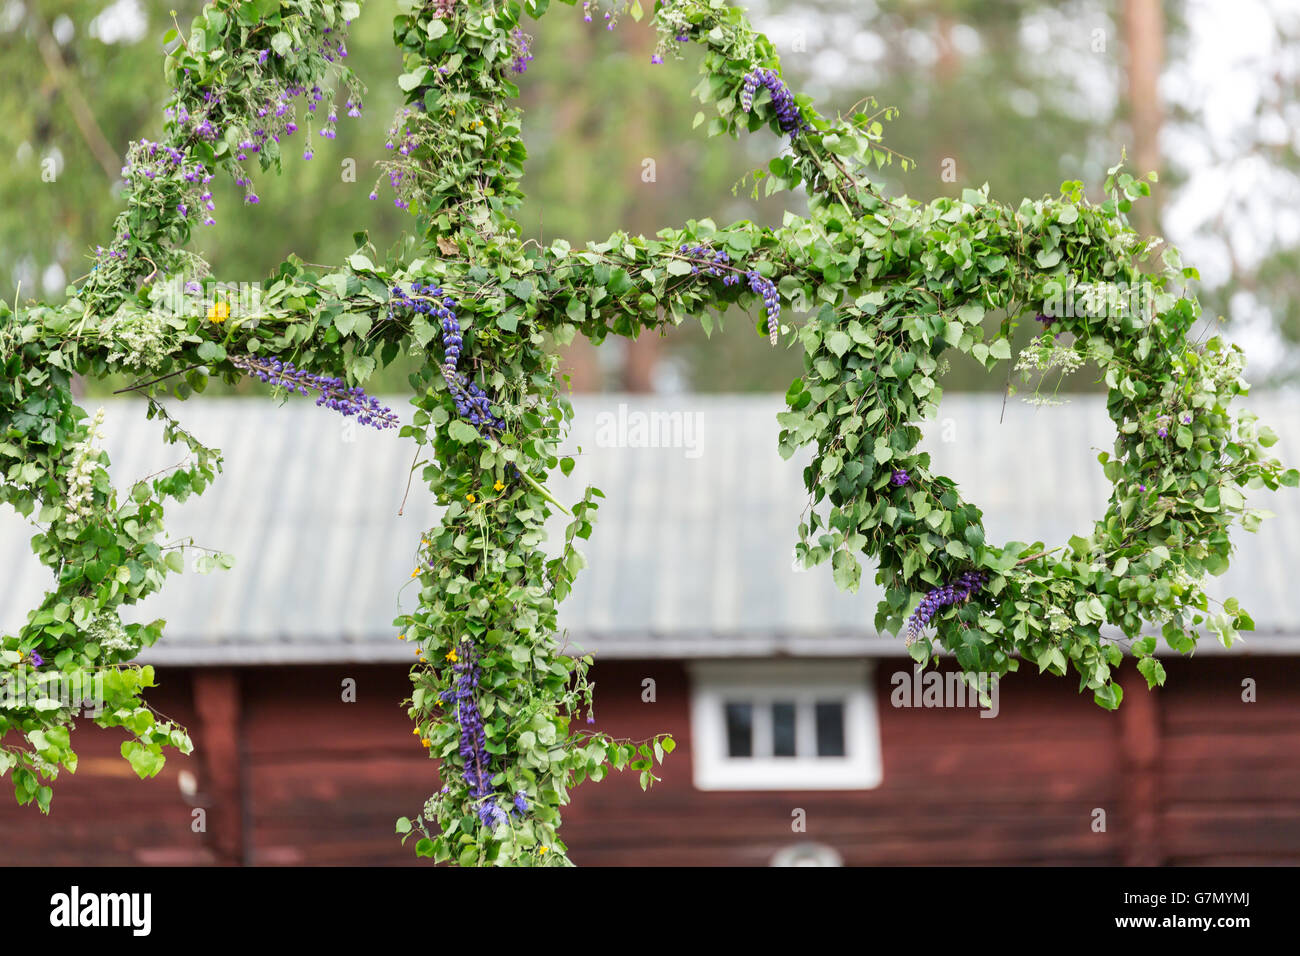 Swedish Traditional Midsummer Pole (Maypole) with a building in the background. Stock Photo